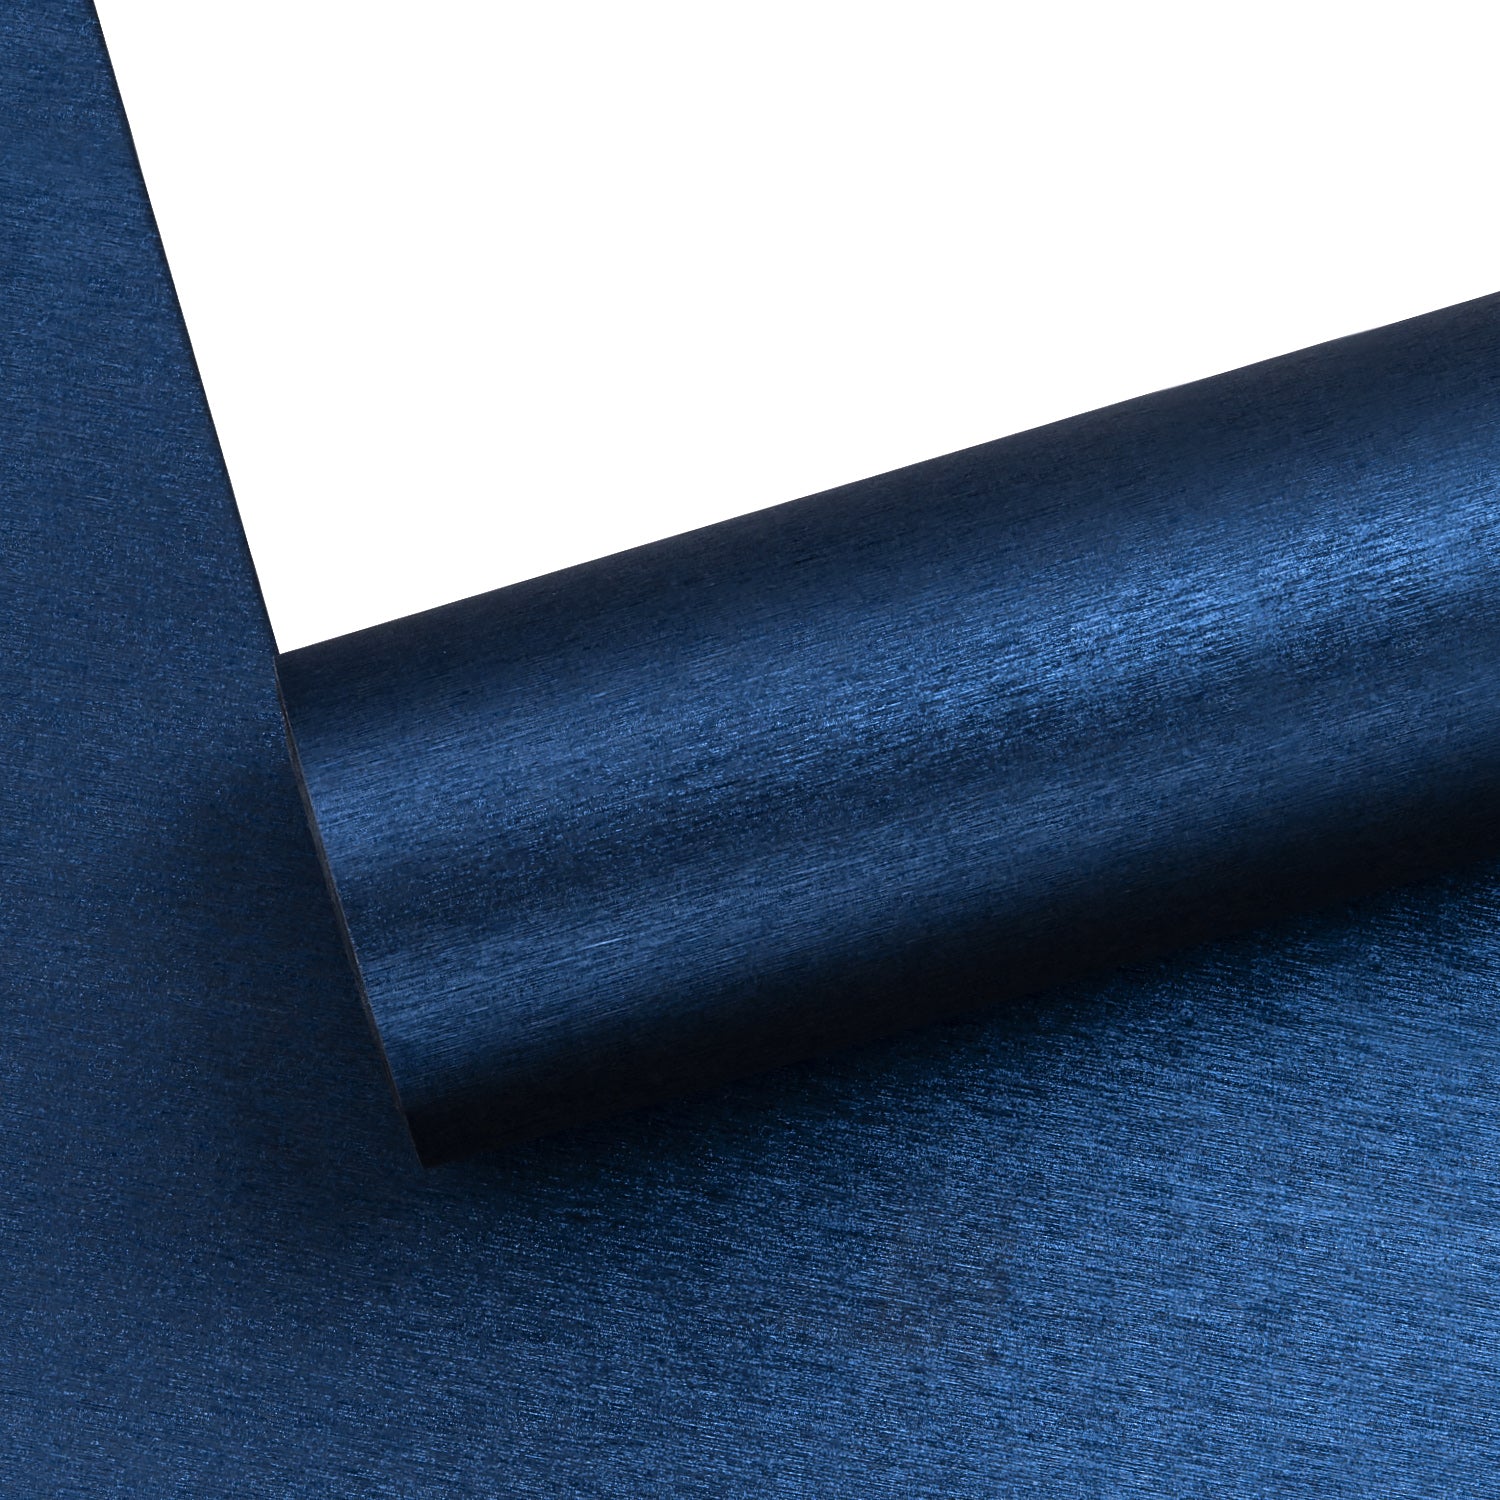 Brushed Aluminum Texture Metallic Wrapping Paper Roll Navy Blue Ream Wholesale Wraphaholic